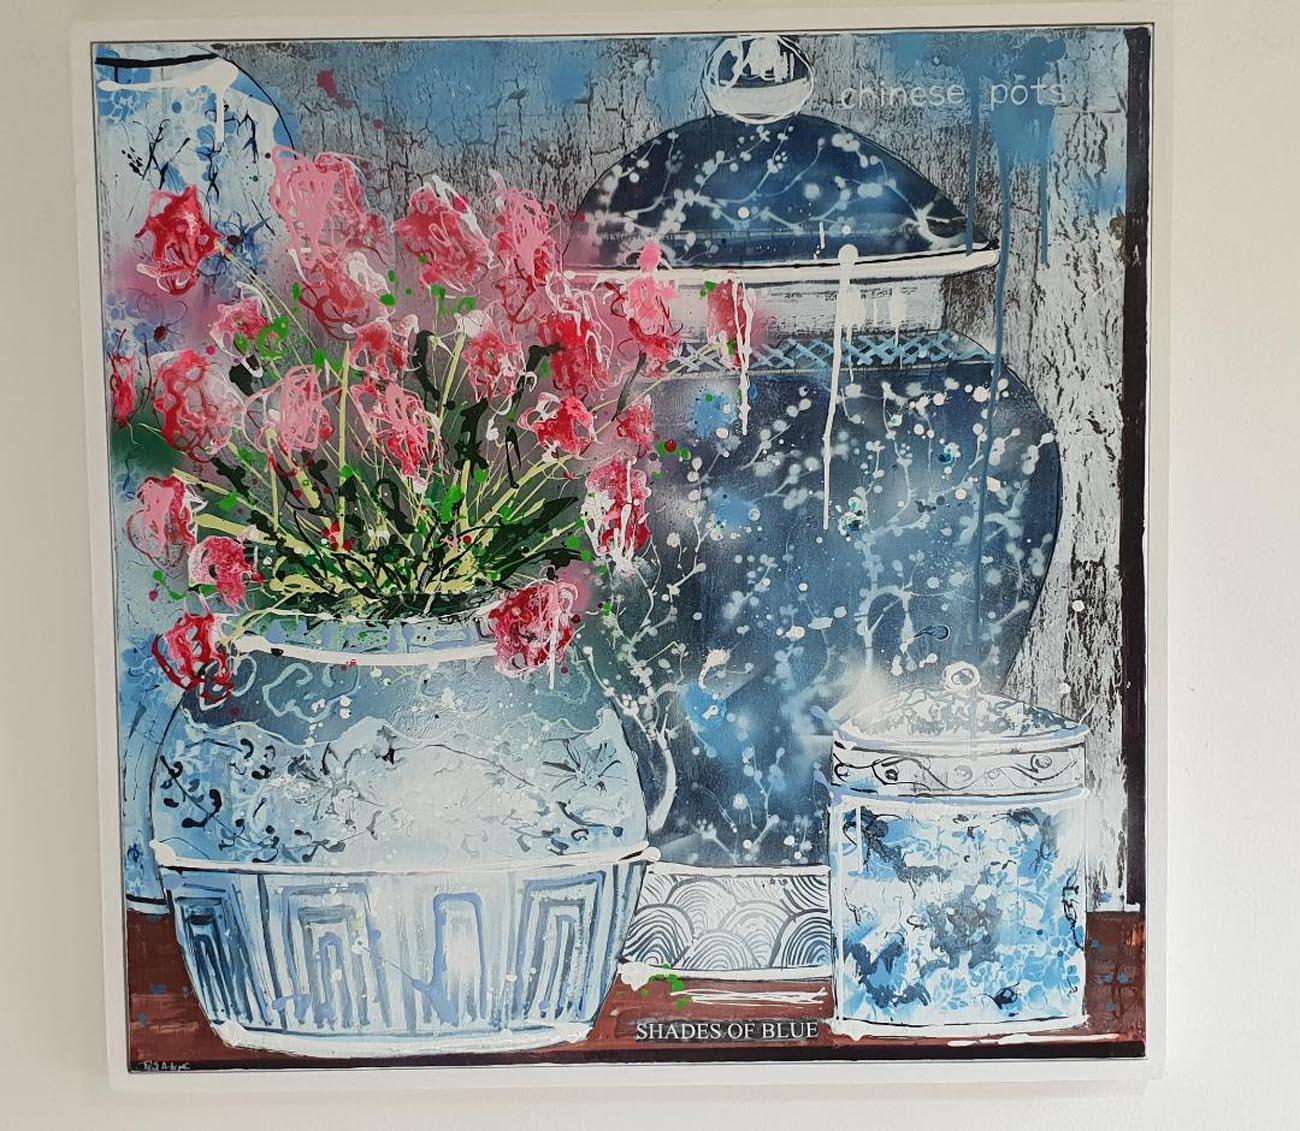 Shades of Blue and a vase of red flowers, still life painting - Painting by Julia Adams